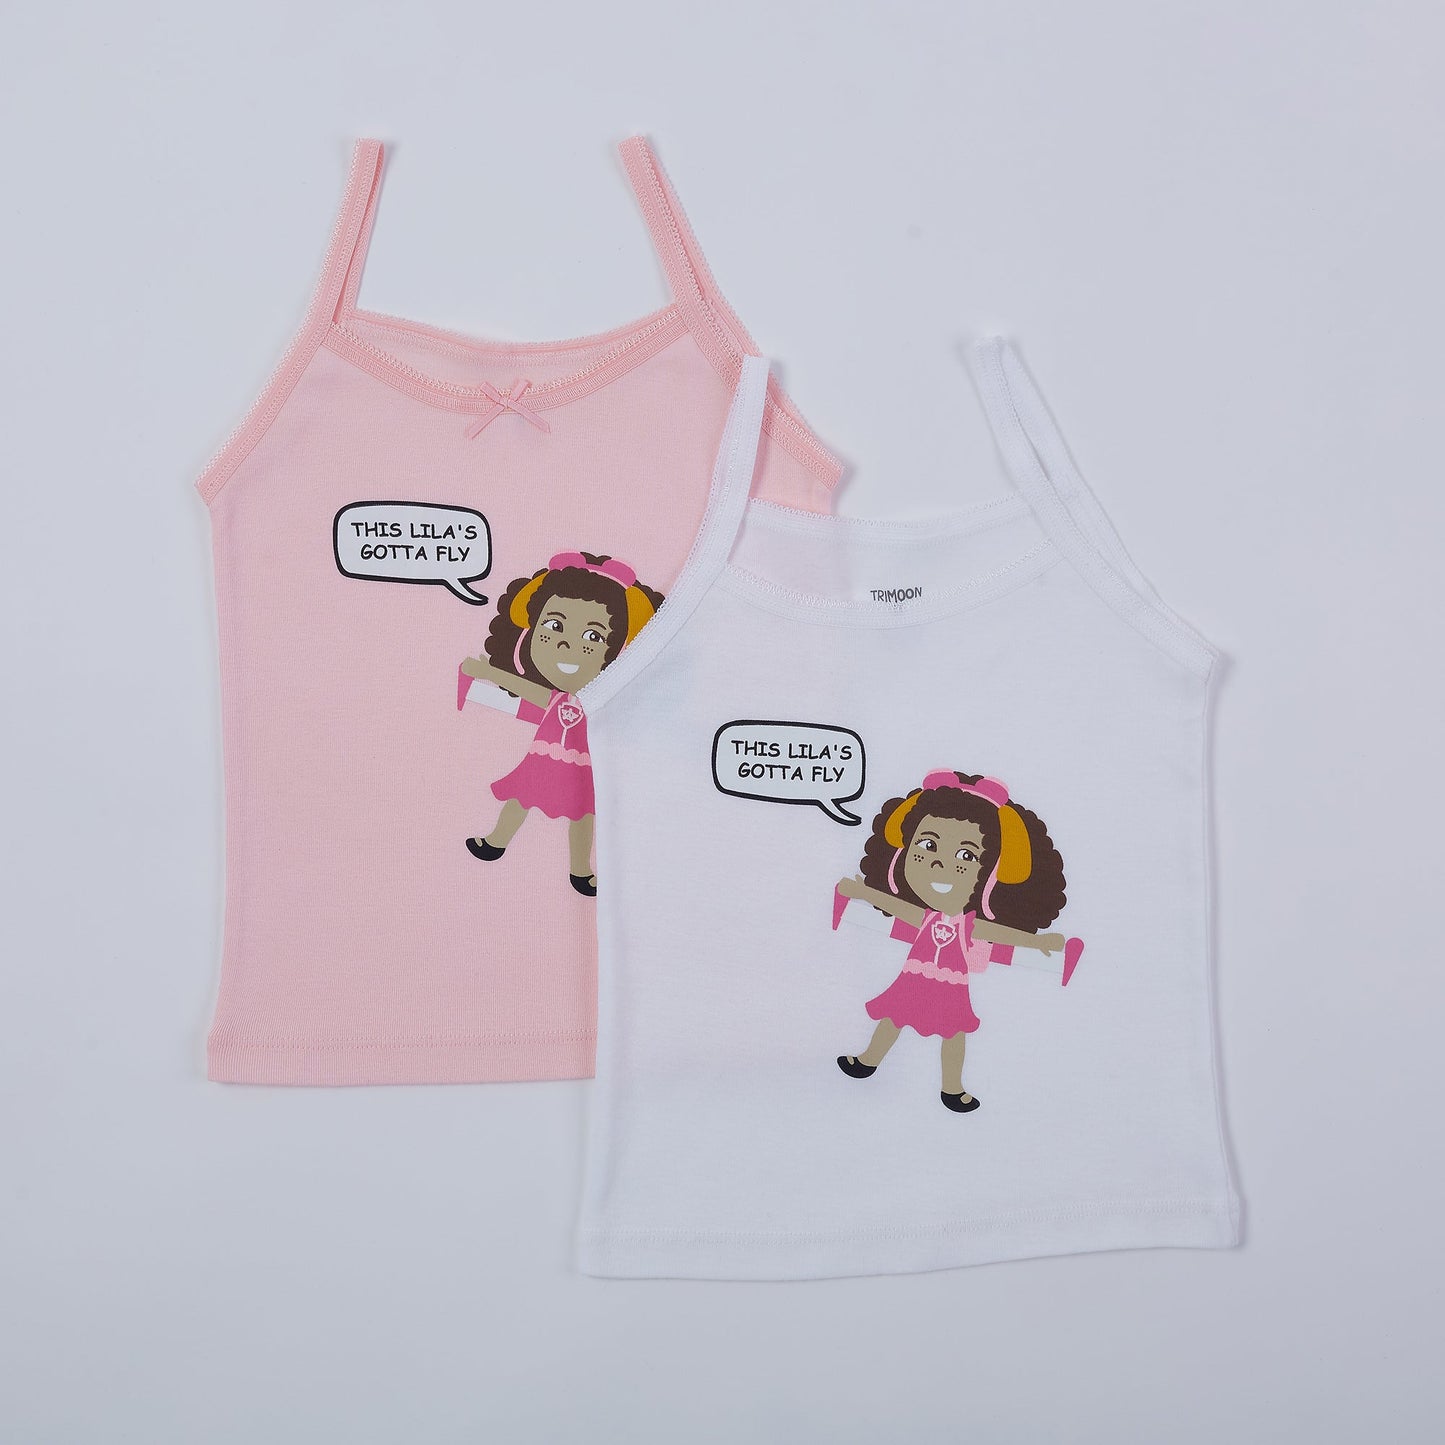 Trimoon Pack of 2 Brand New Undershirts For Girls - Lila Flies - mymadstore.com